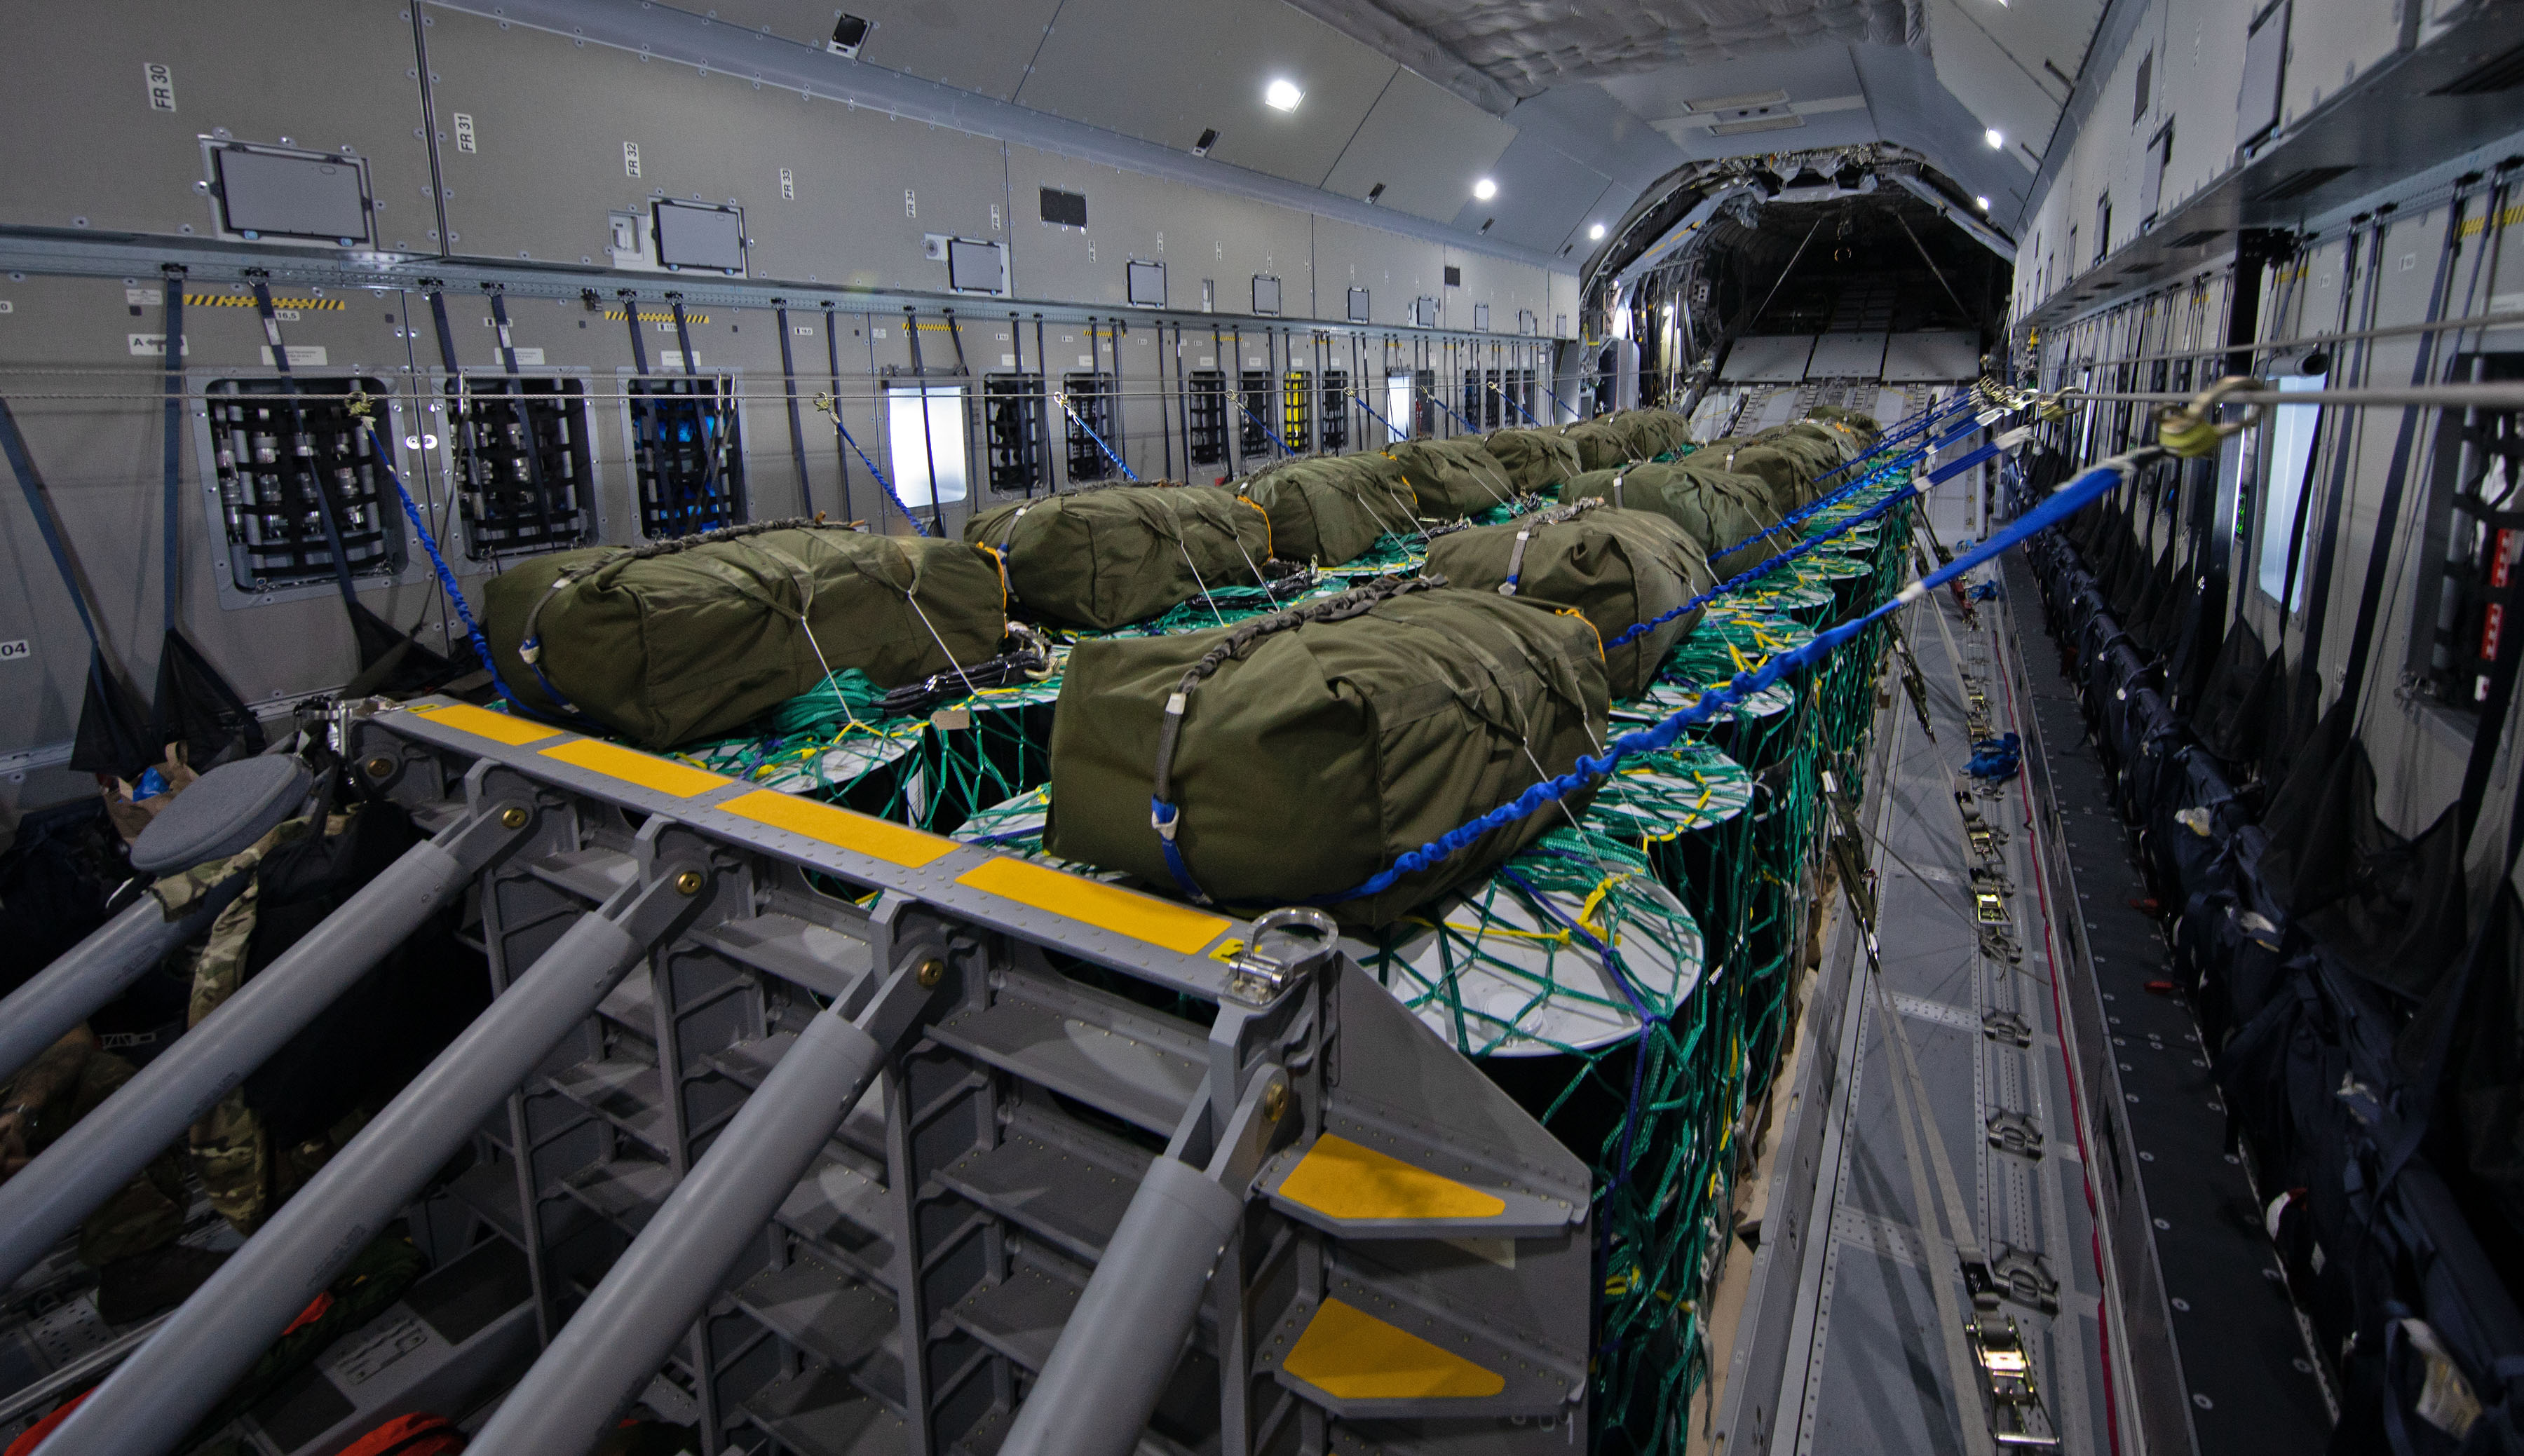 Image shows cargo inside the holding bay of a carrier aircraft.